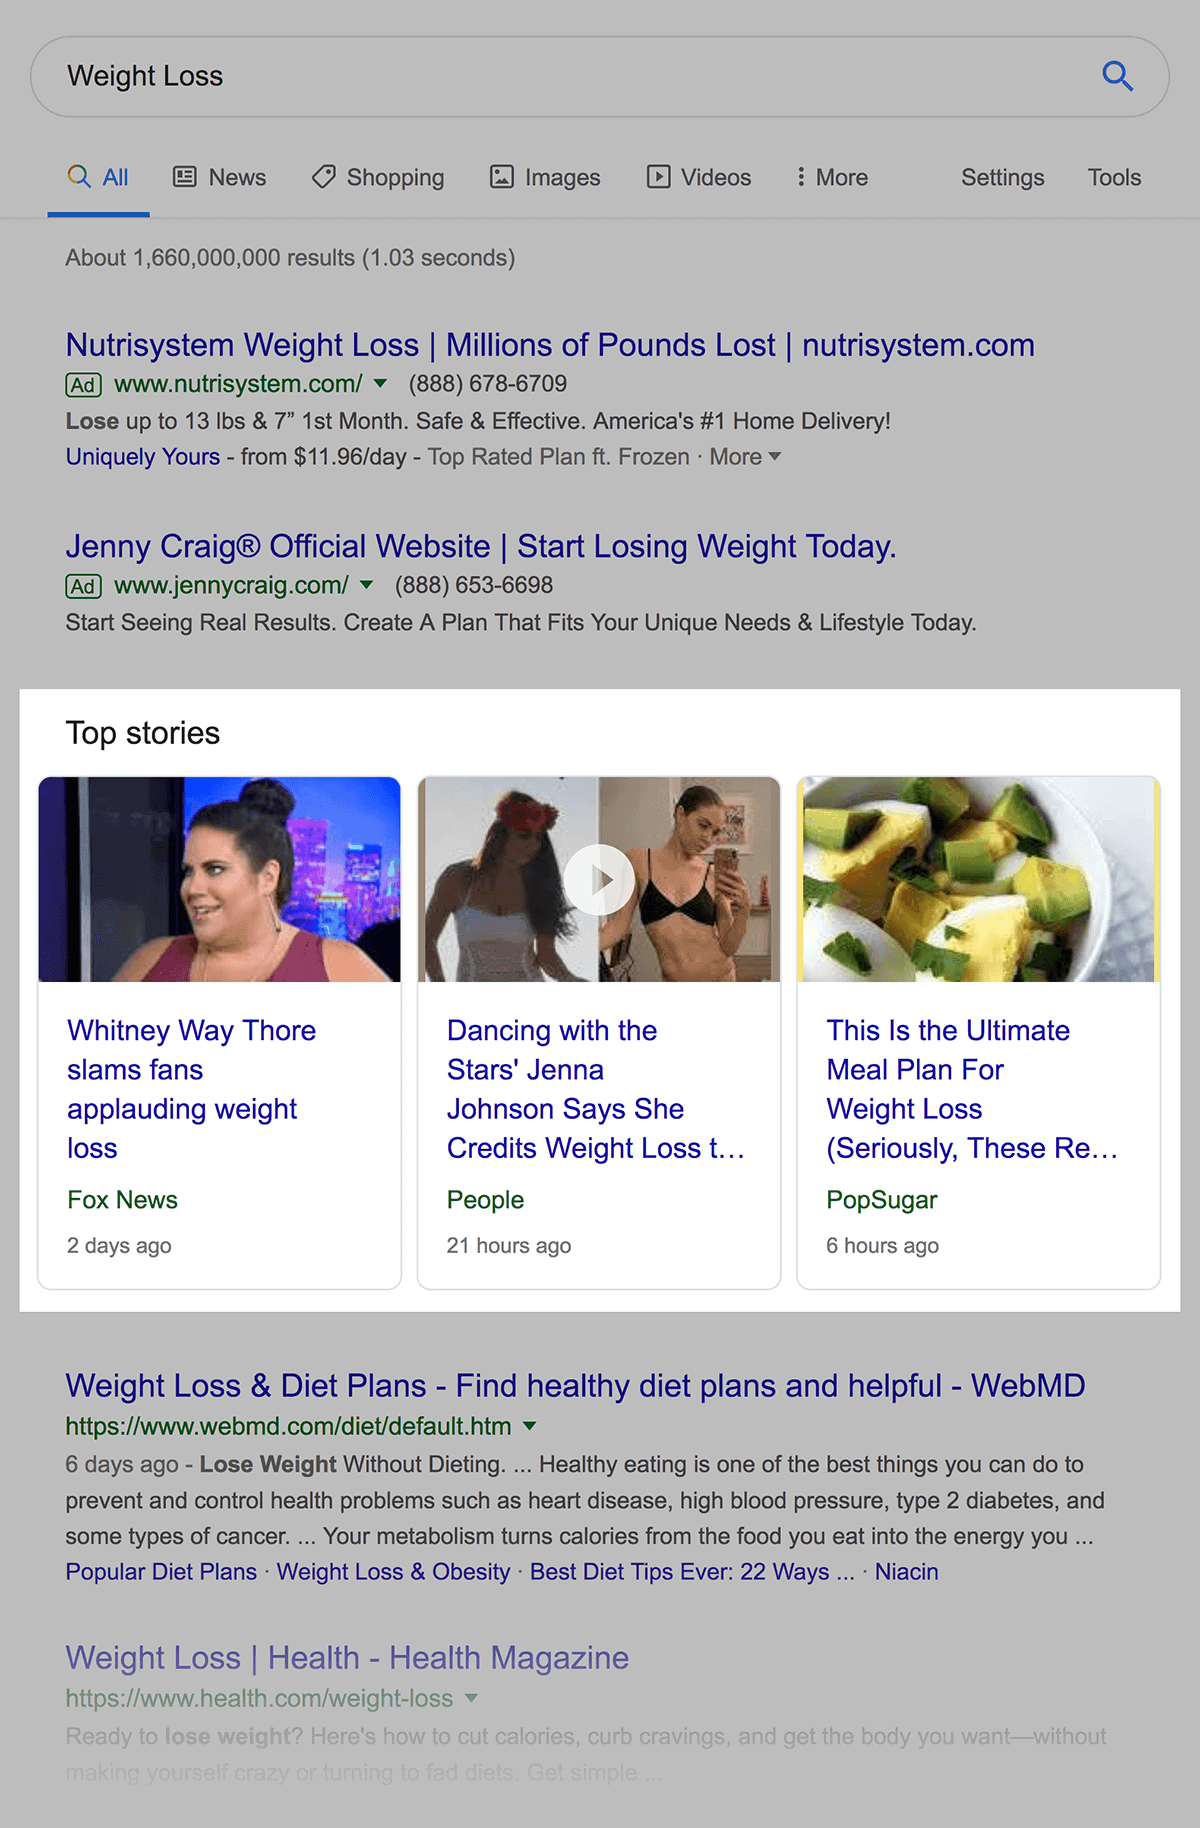 "Weight Loss" Top Stories